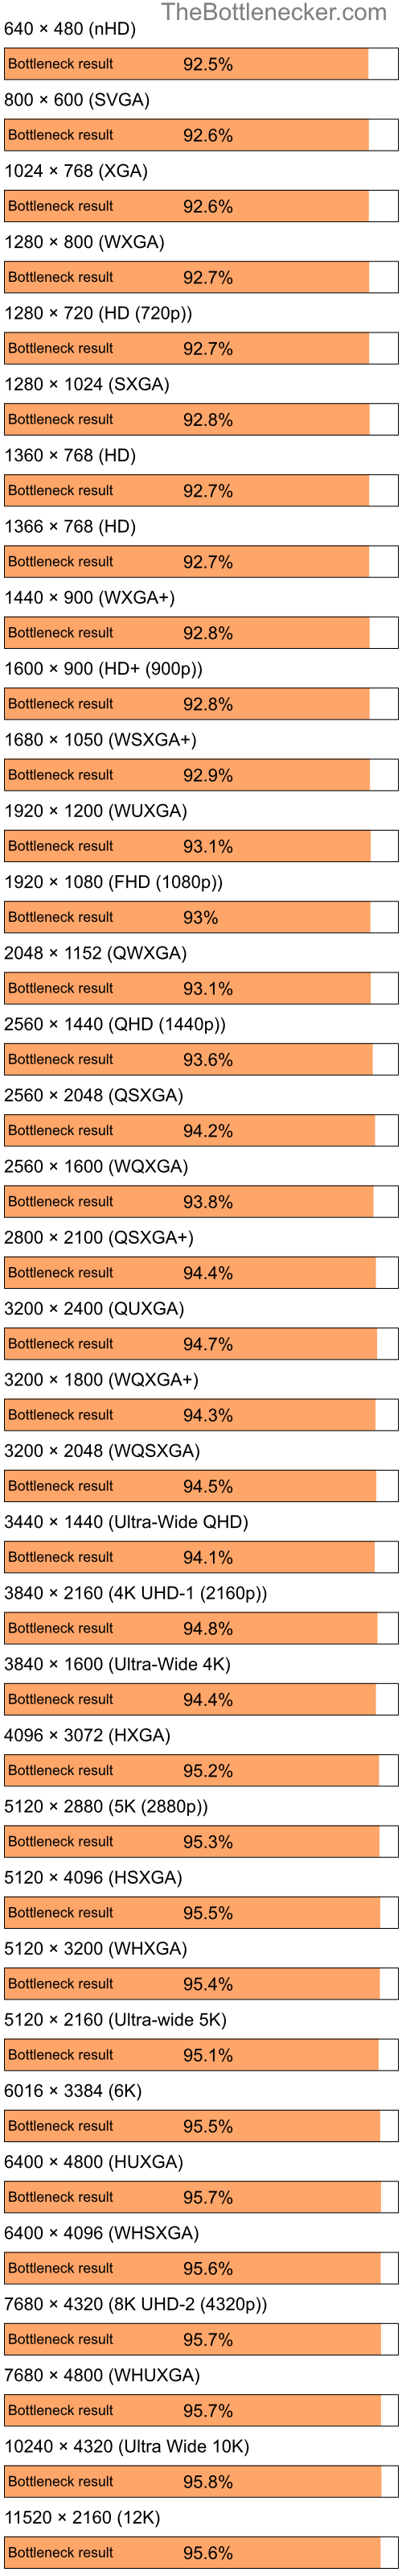 Bottleneck results by resolution for Intel Celeron and AMD Radeon 9200 SE in Graphic Card Intense Tasks